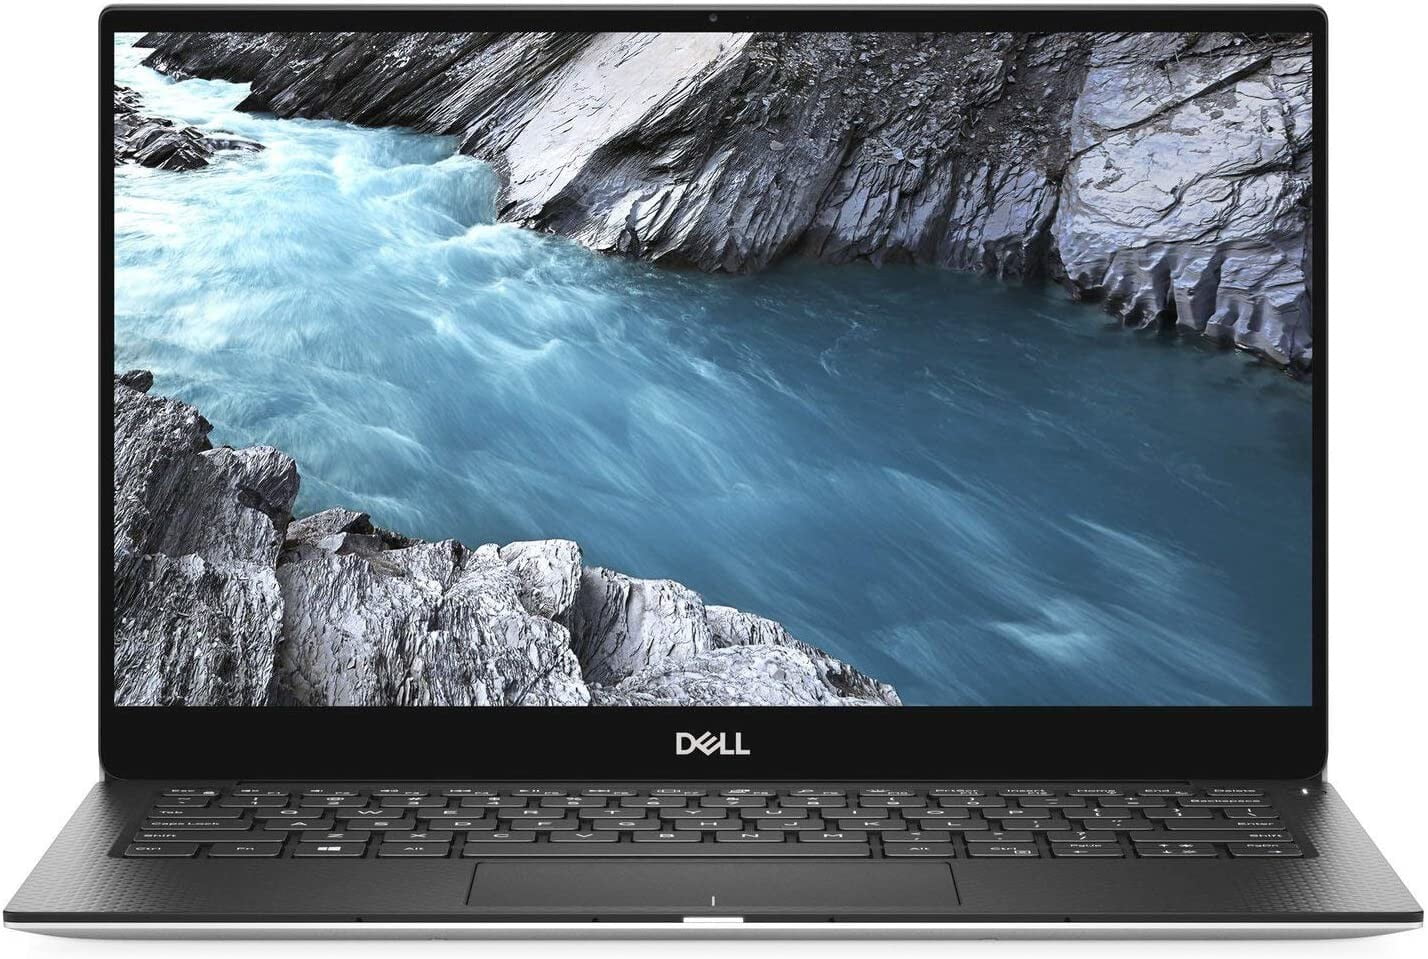 $ 700 off Dell XPS laptop today with this offer